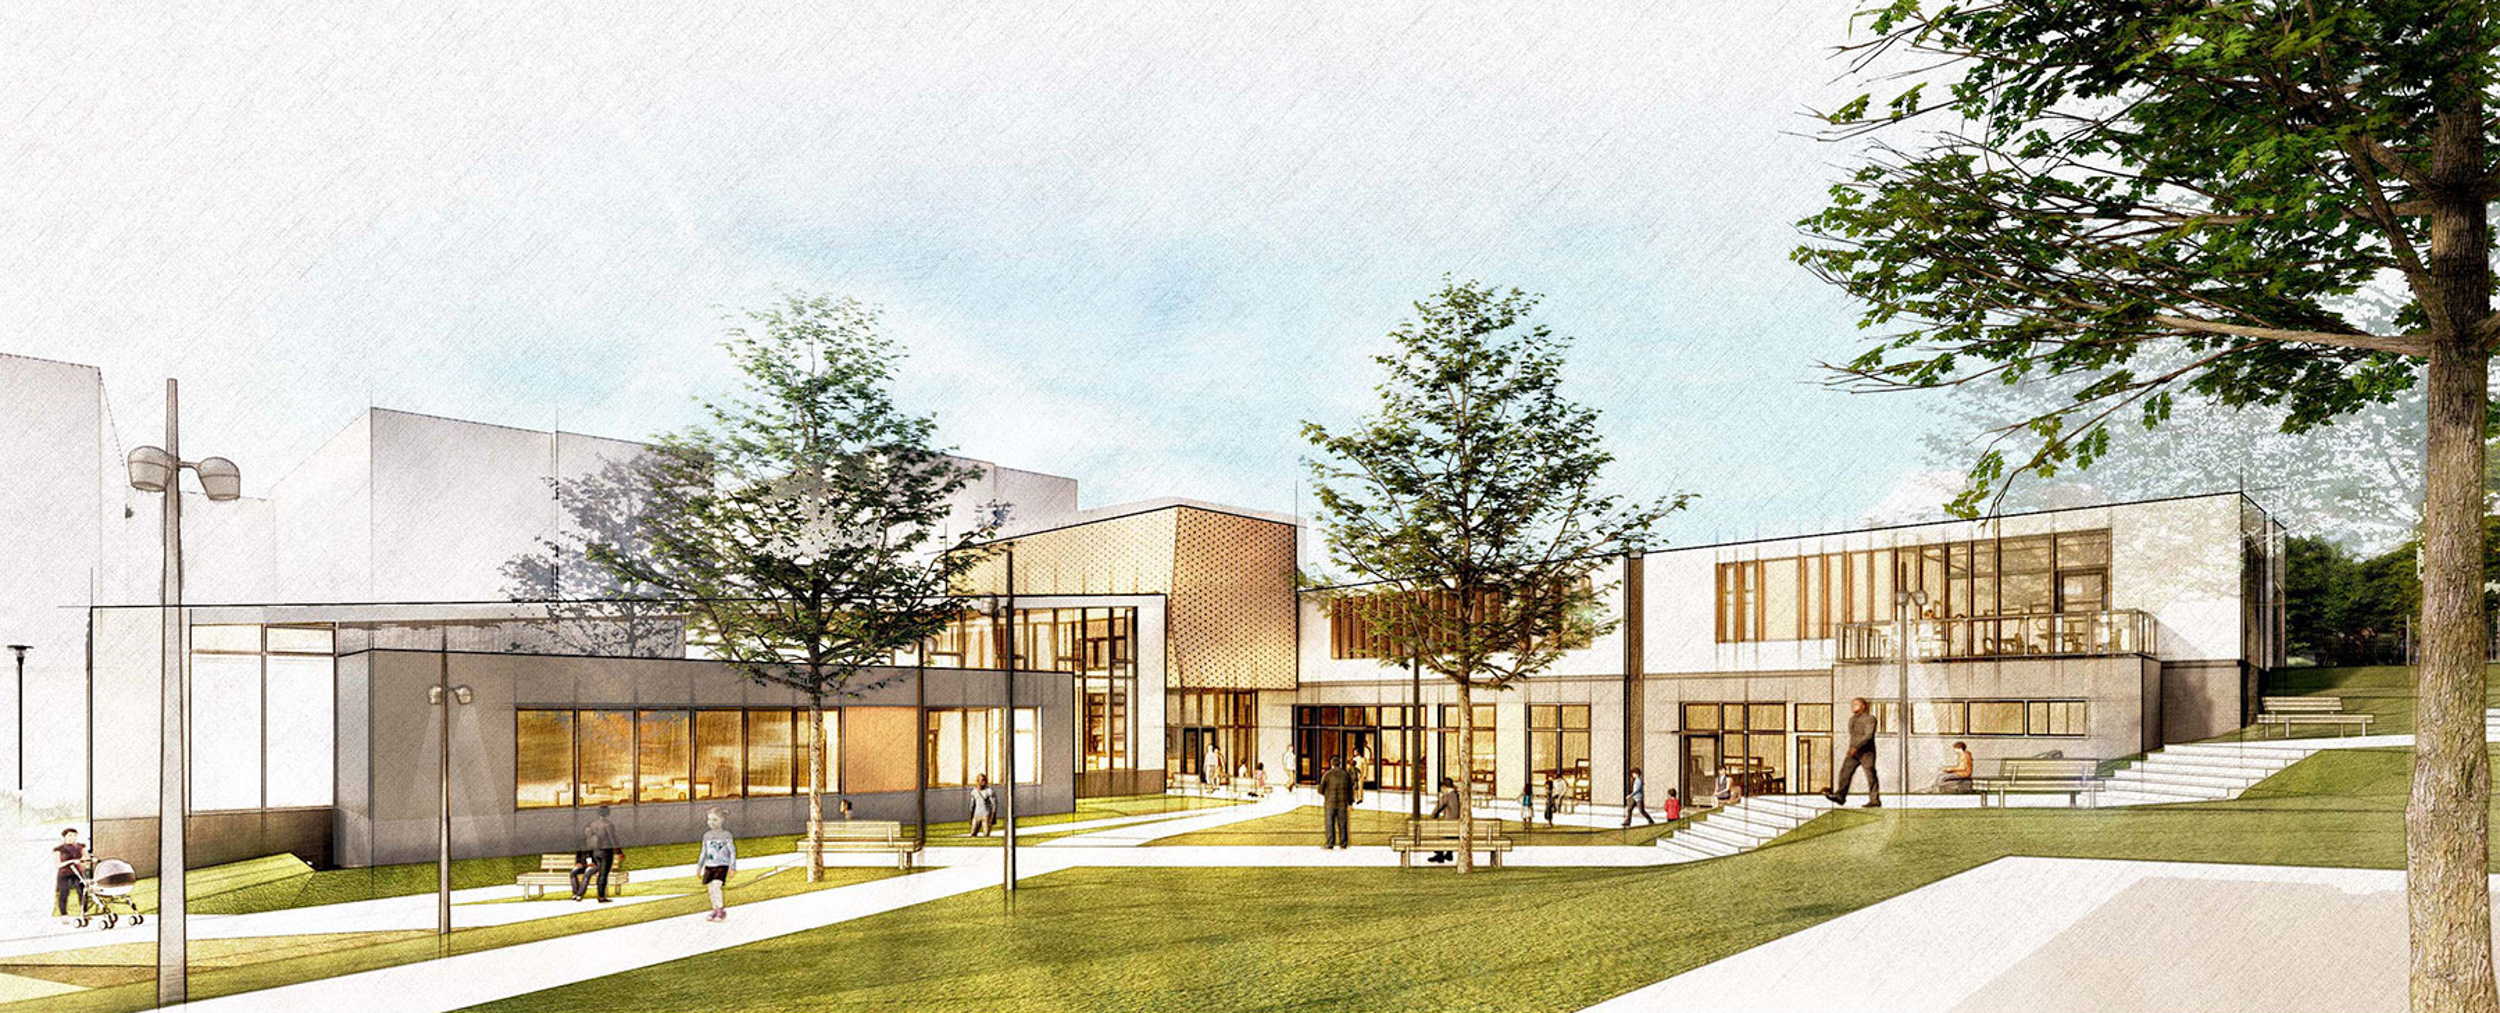 Sunnydale Community Center pedestrian view from the open space, rendering by LMS Architects